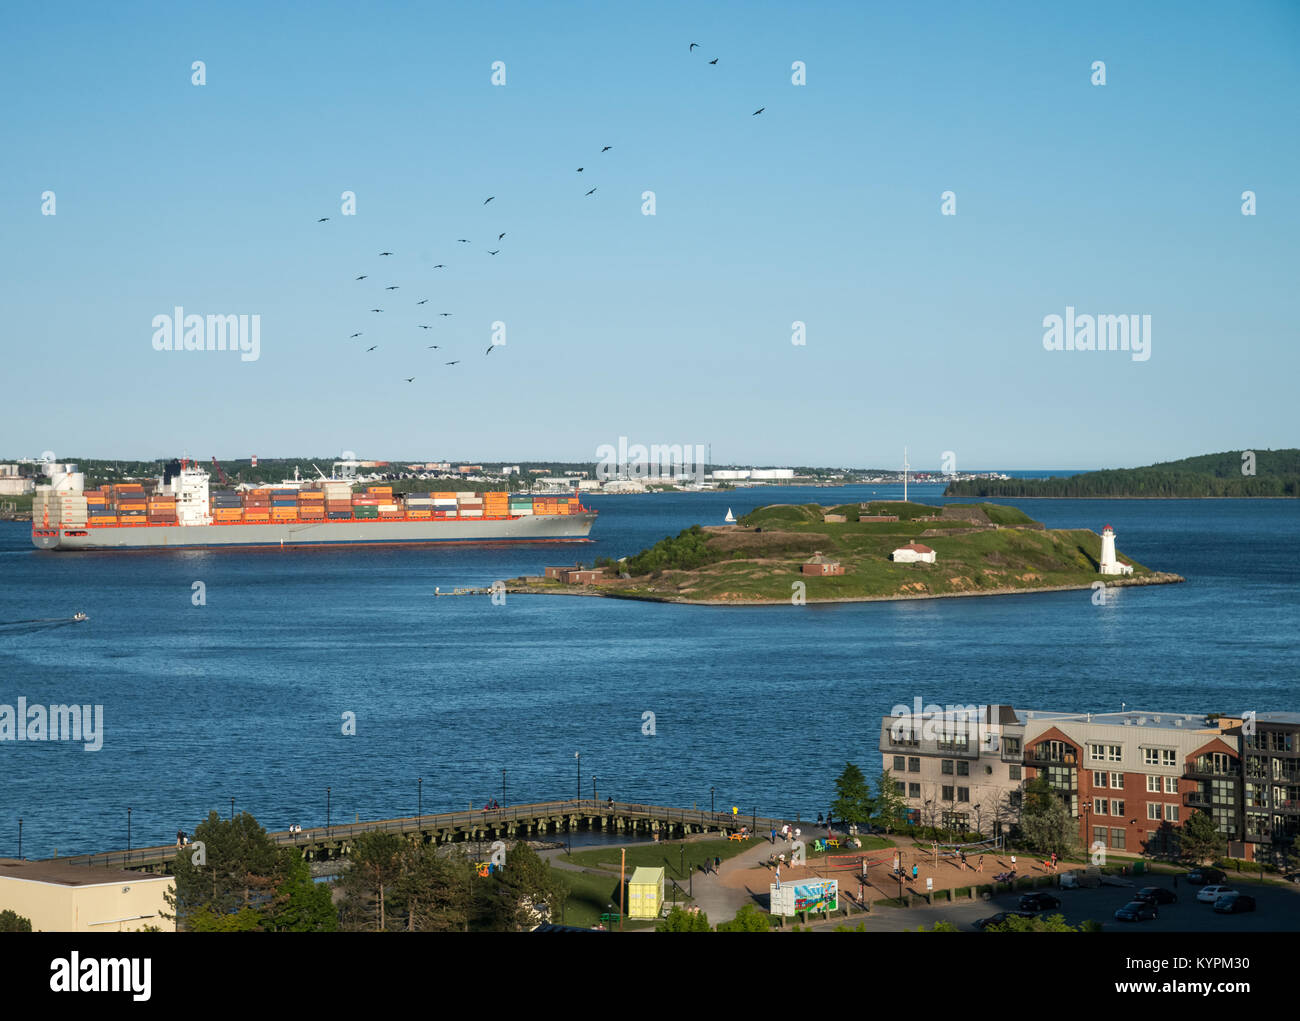 Aerial view of a cargo ship navigating the harbor near Georges Island in Halifax, Nova Scotia, Canada Stock Photo